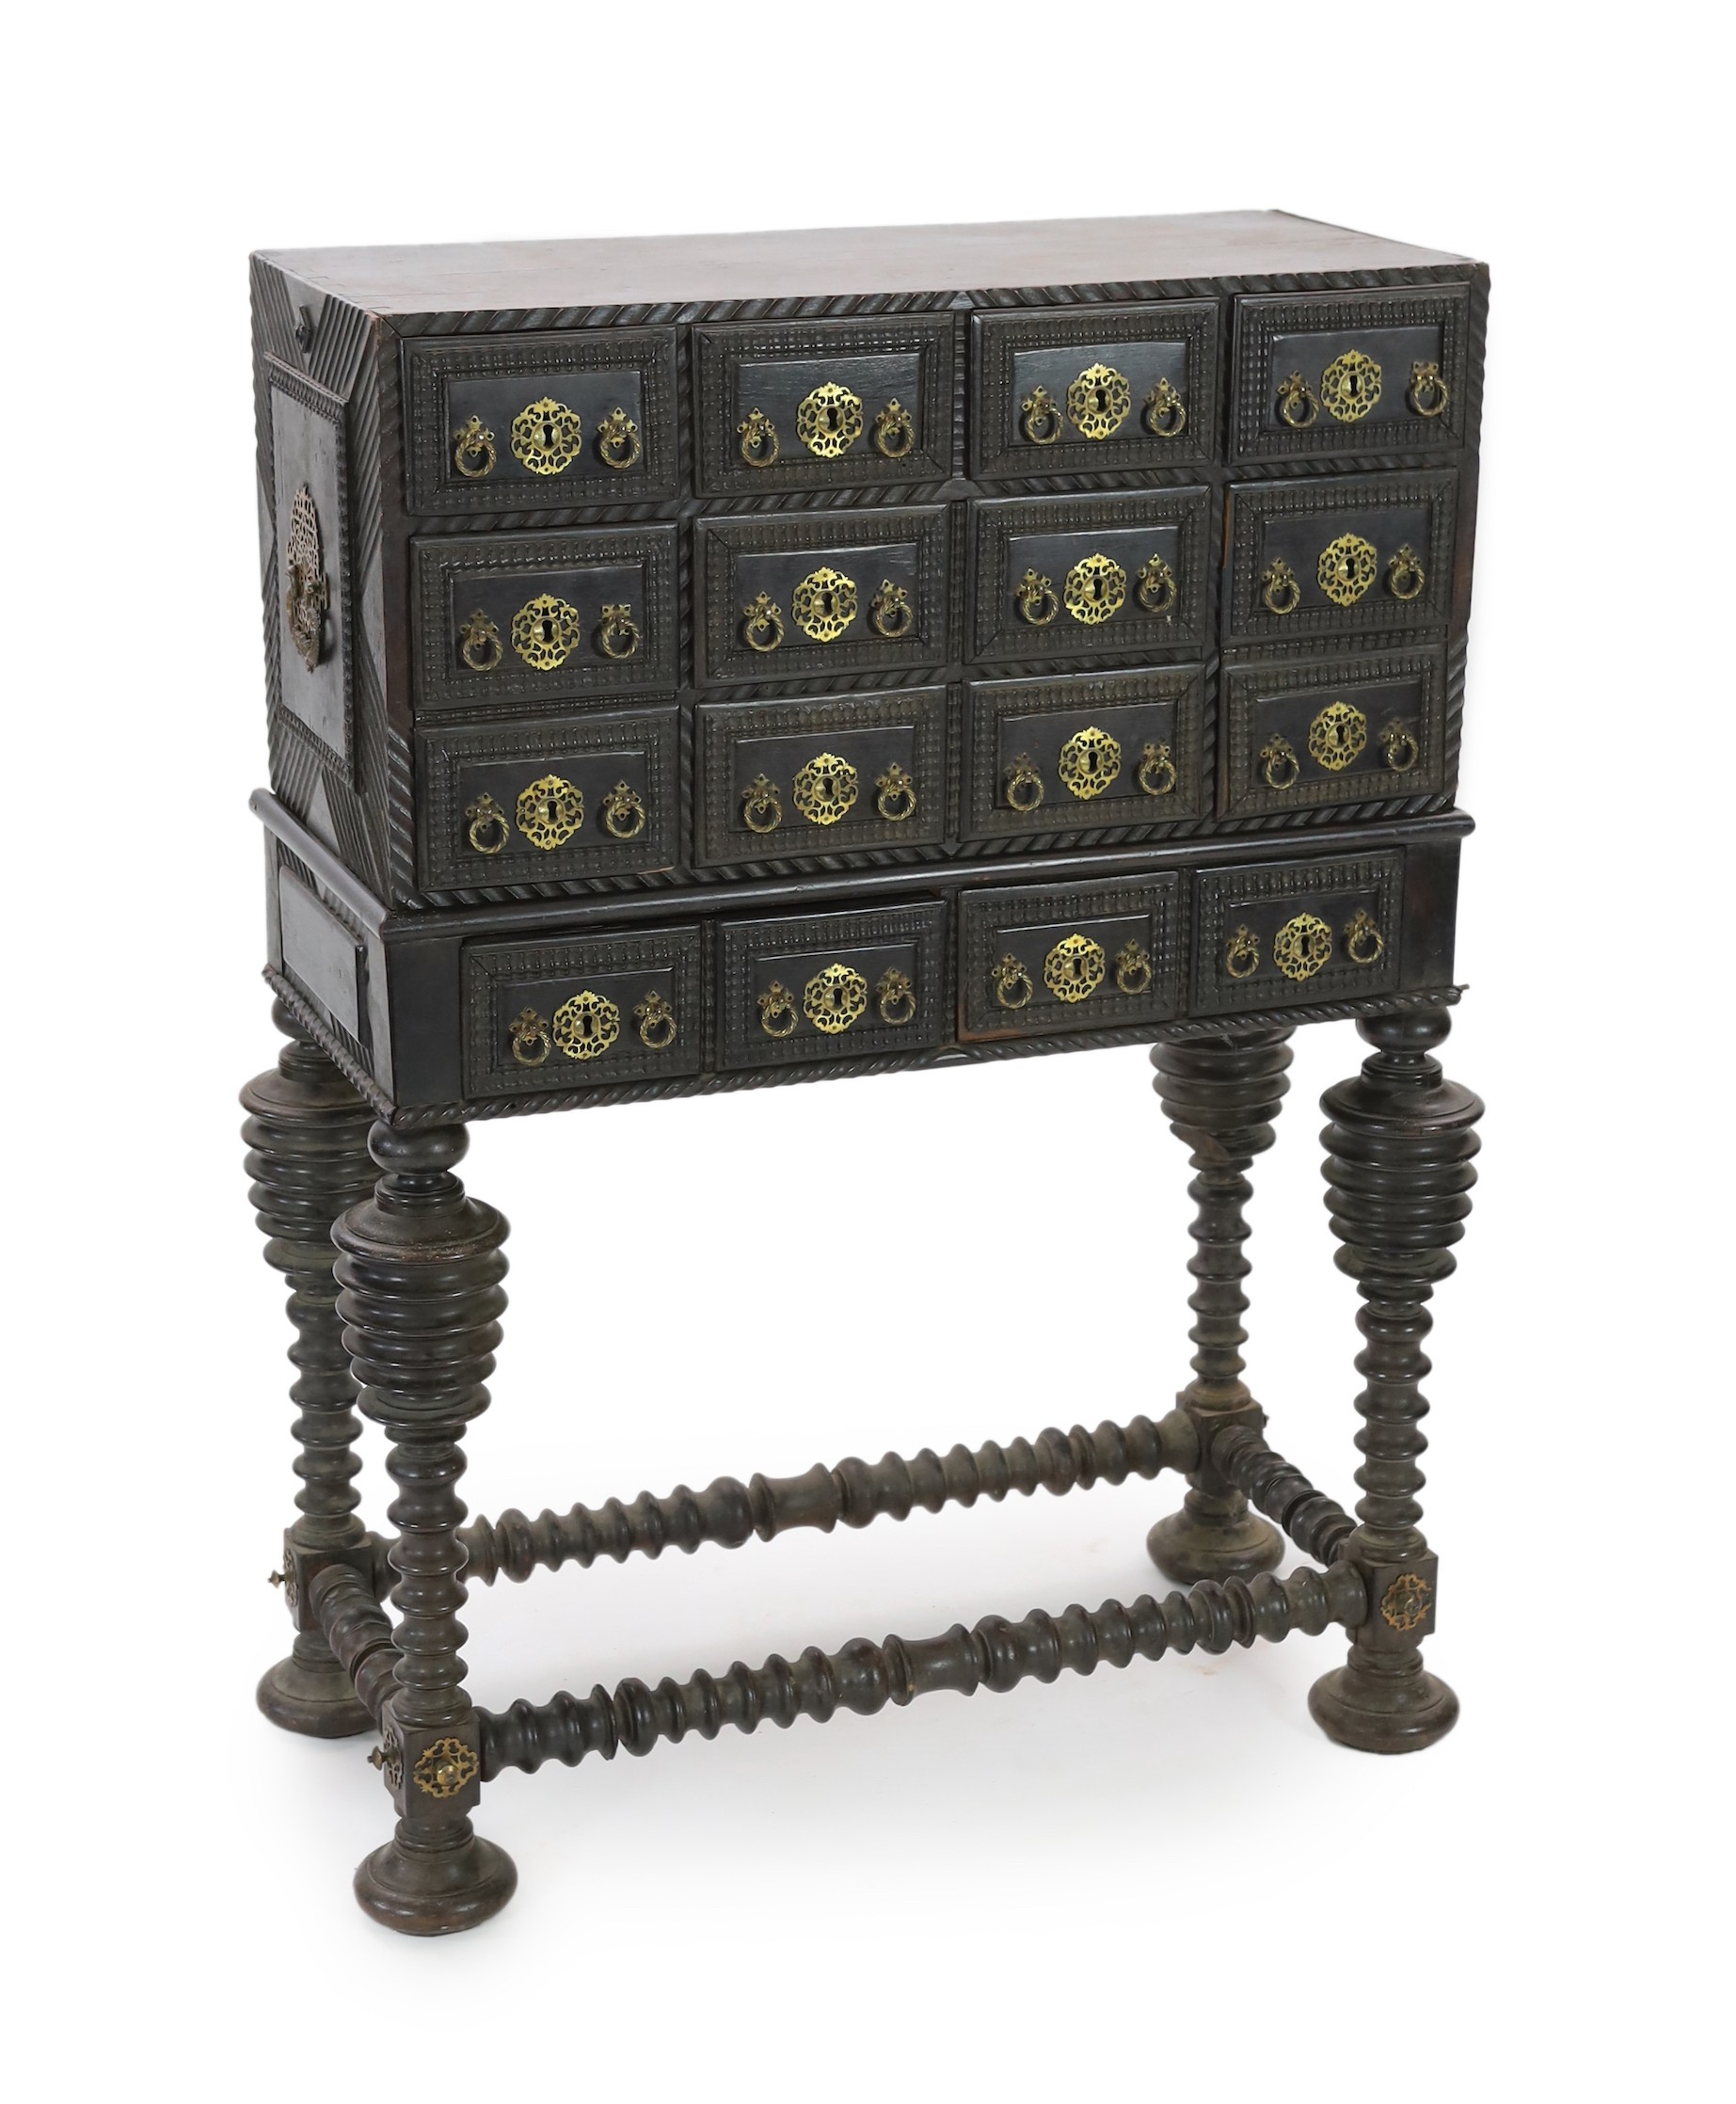 A 17th century Portuguese brass mounted ebonised rosewood Contador on stand With twelve ripple